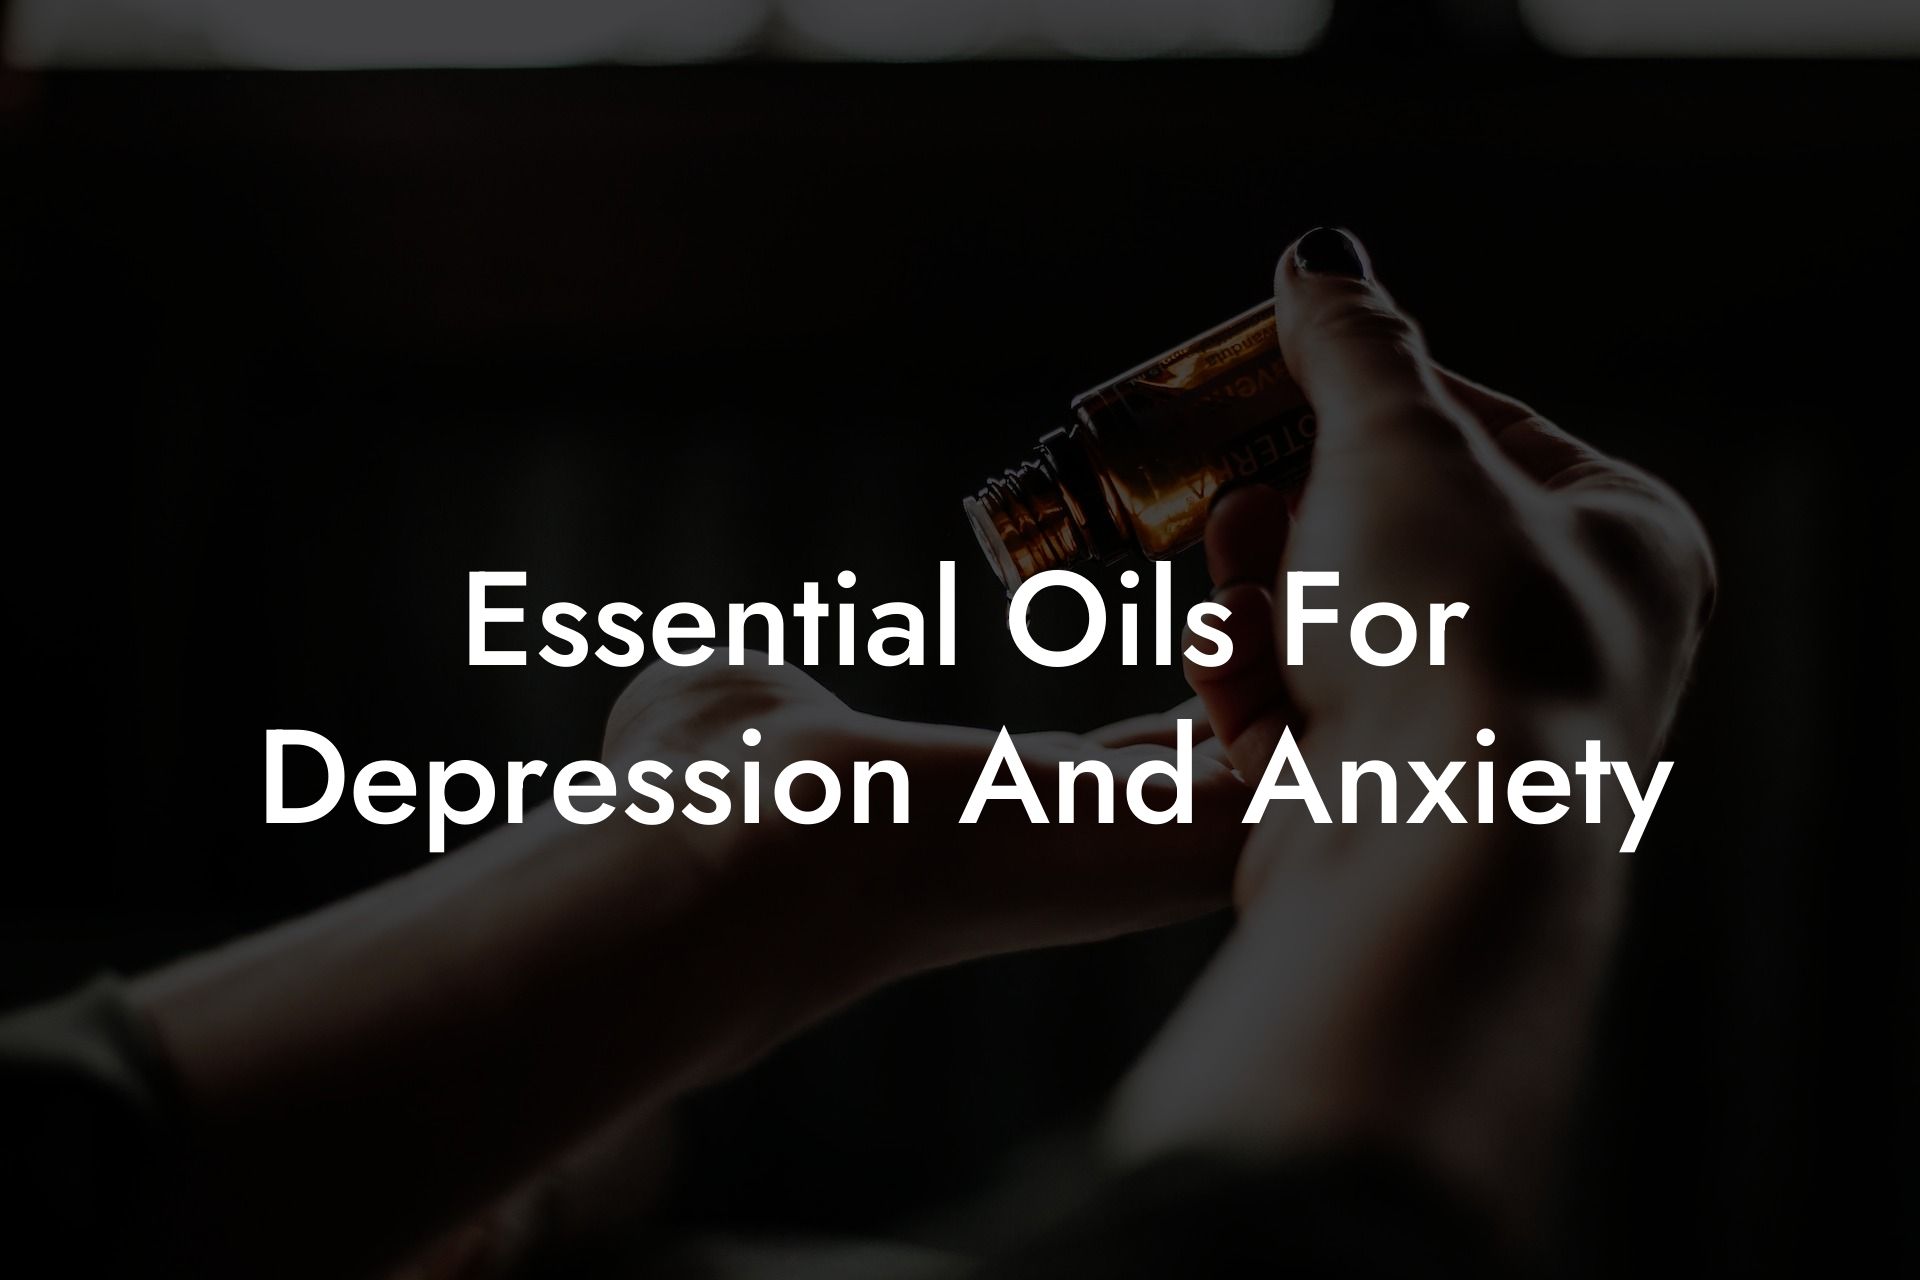 Essential Oils For Depression And Anxiety